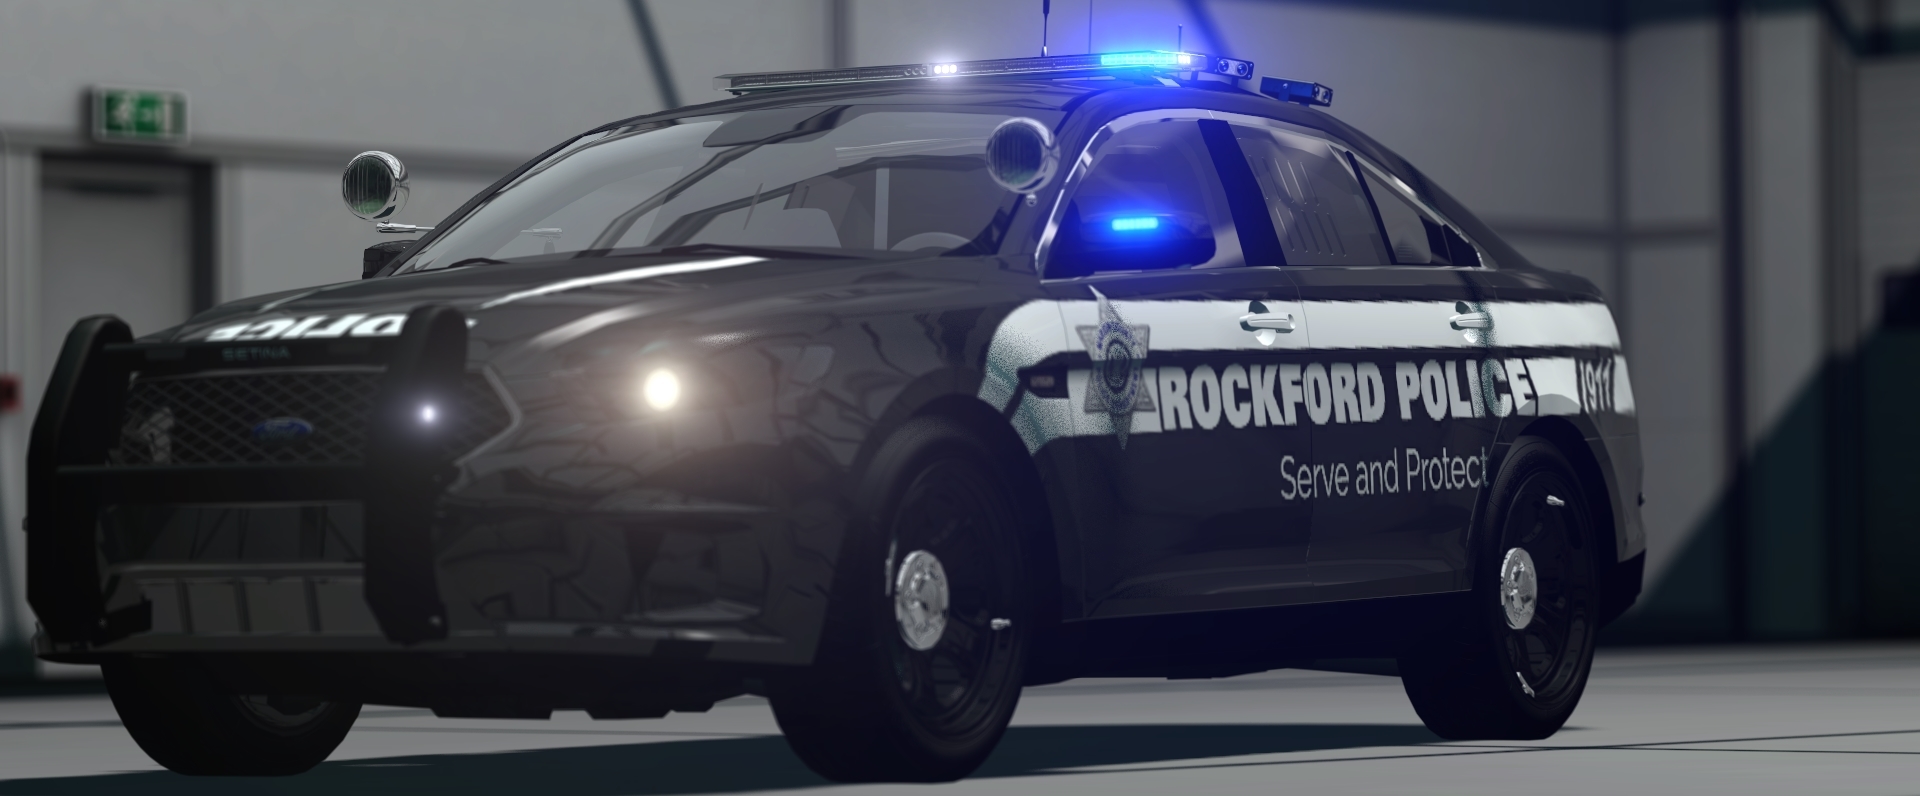 A 2013 Taurus with Rockford Police Livery.